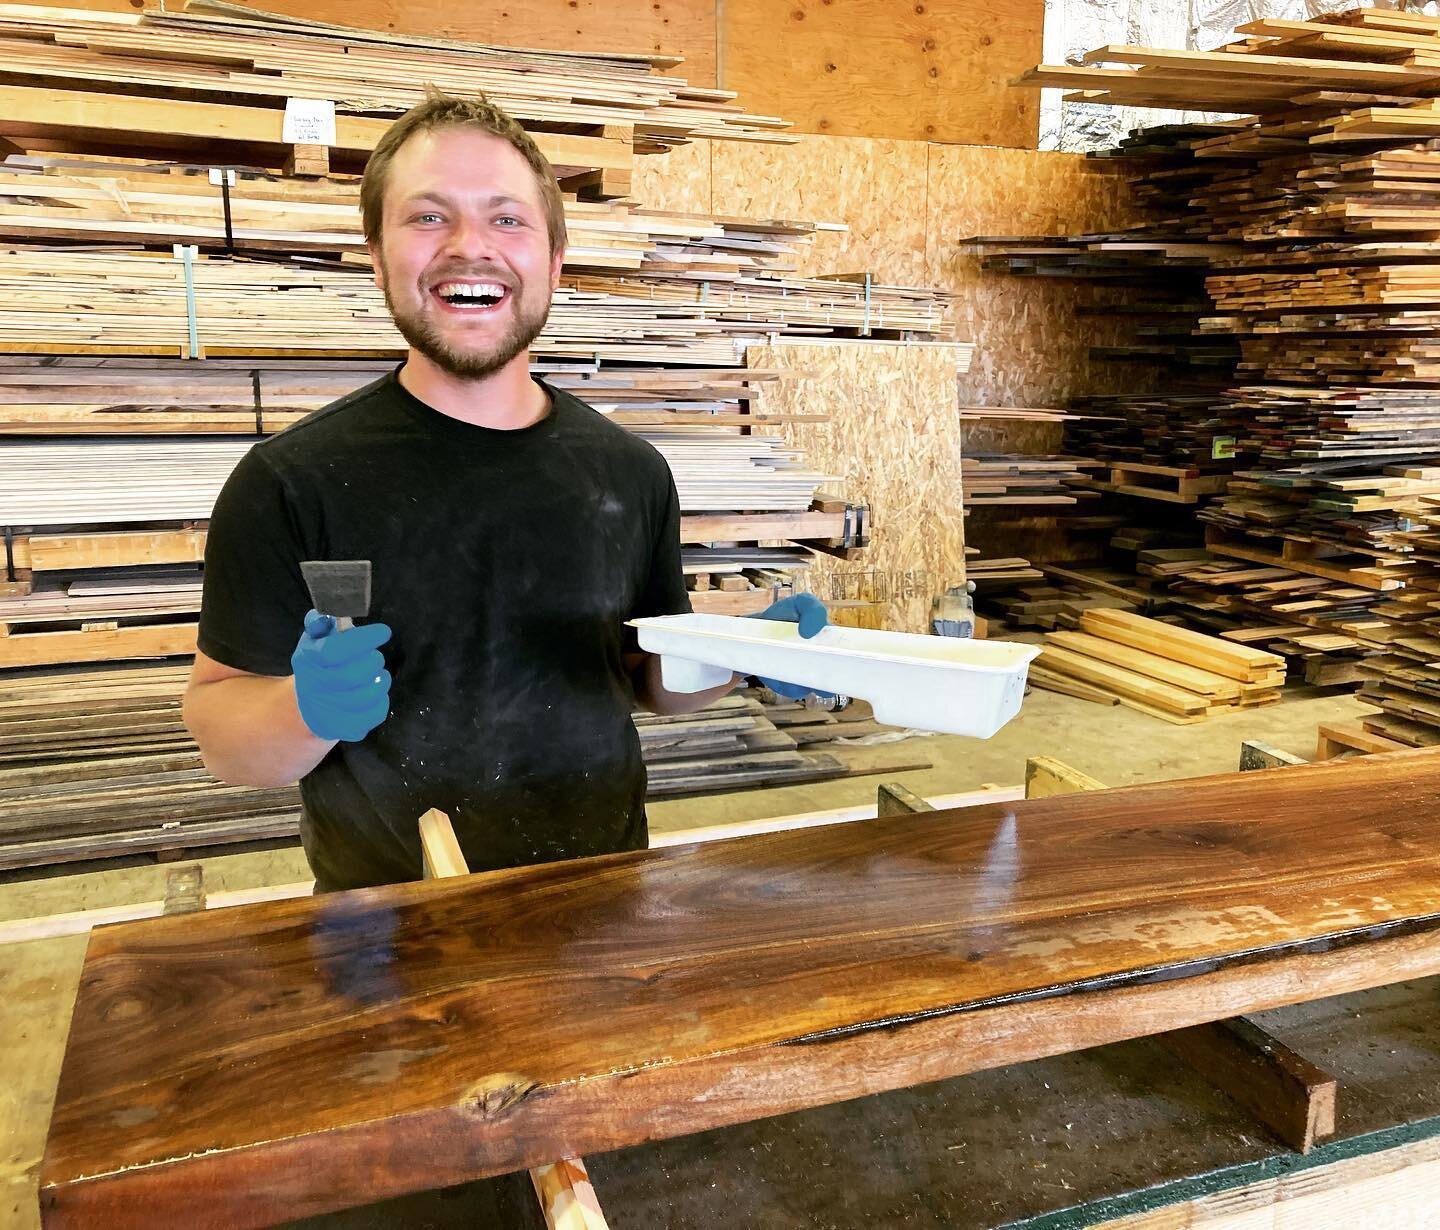 Big shoutout to our production team working hard in the heat of the summer! They are a talented, fun and hardworking bunch who consistently turn out quality work. Thanks guys! 
.
.
.
.
#reclaimedwood #wood #teamwork #team #woodworker #woodworking #wa